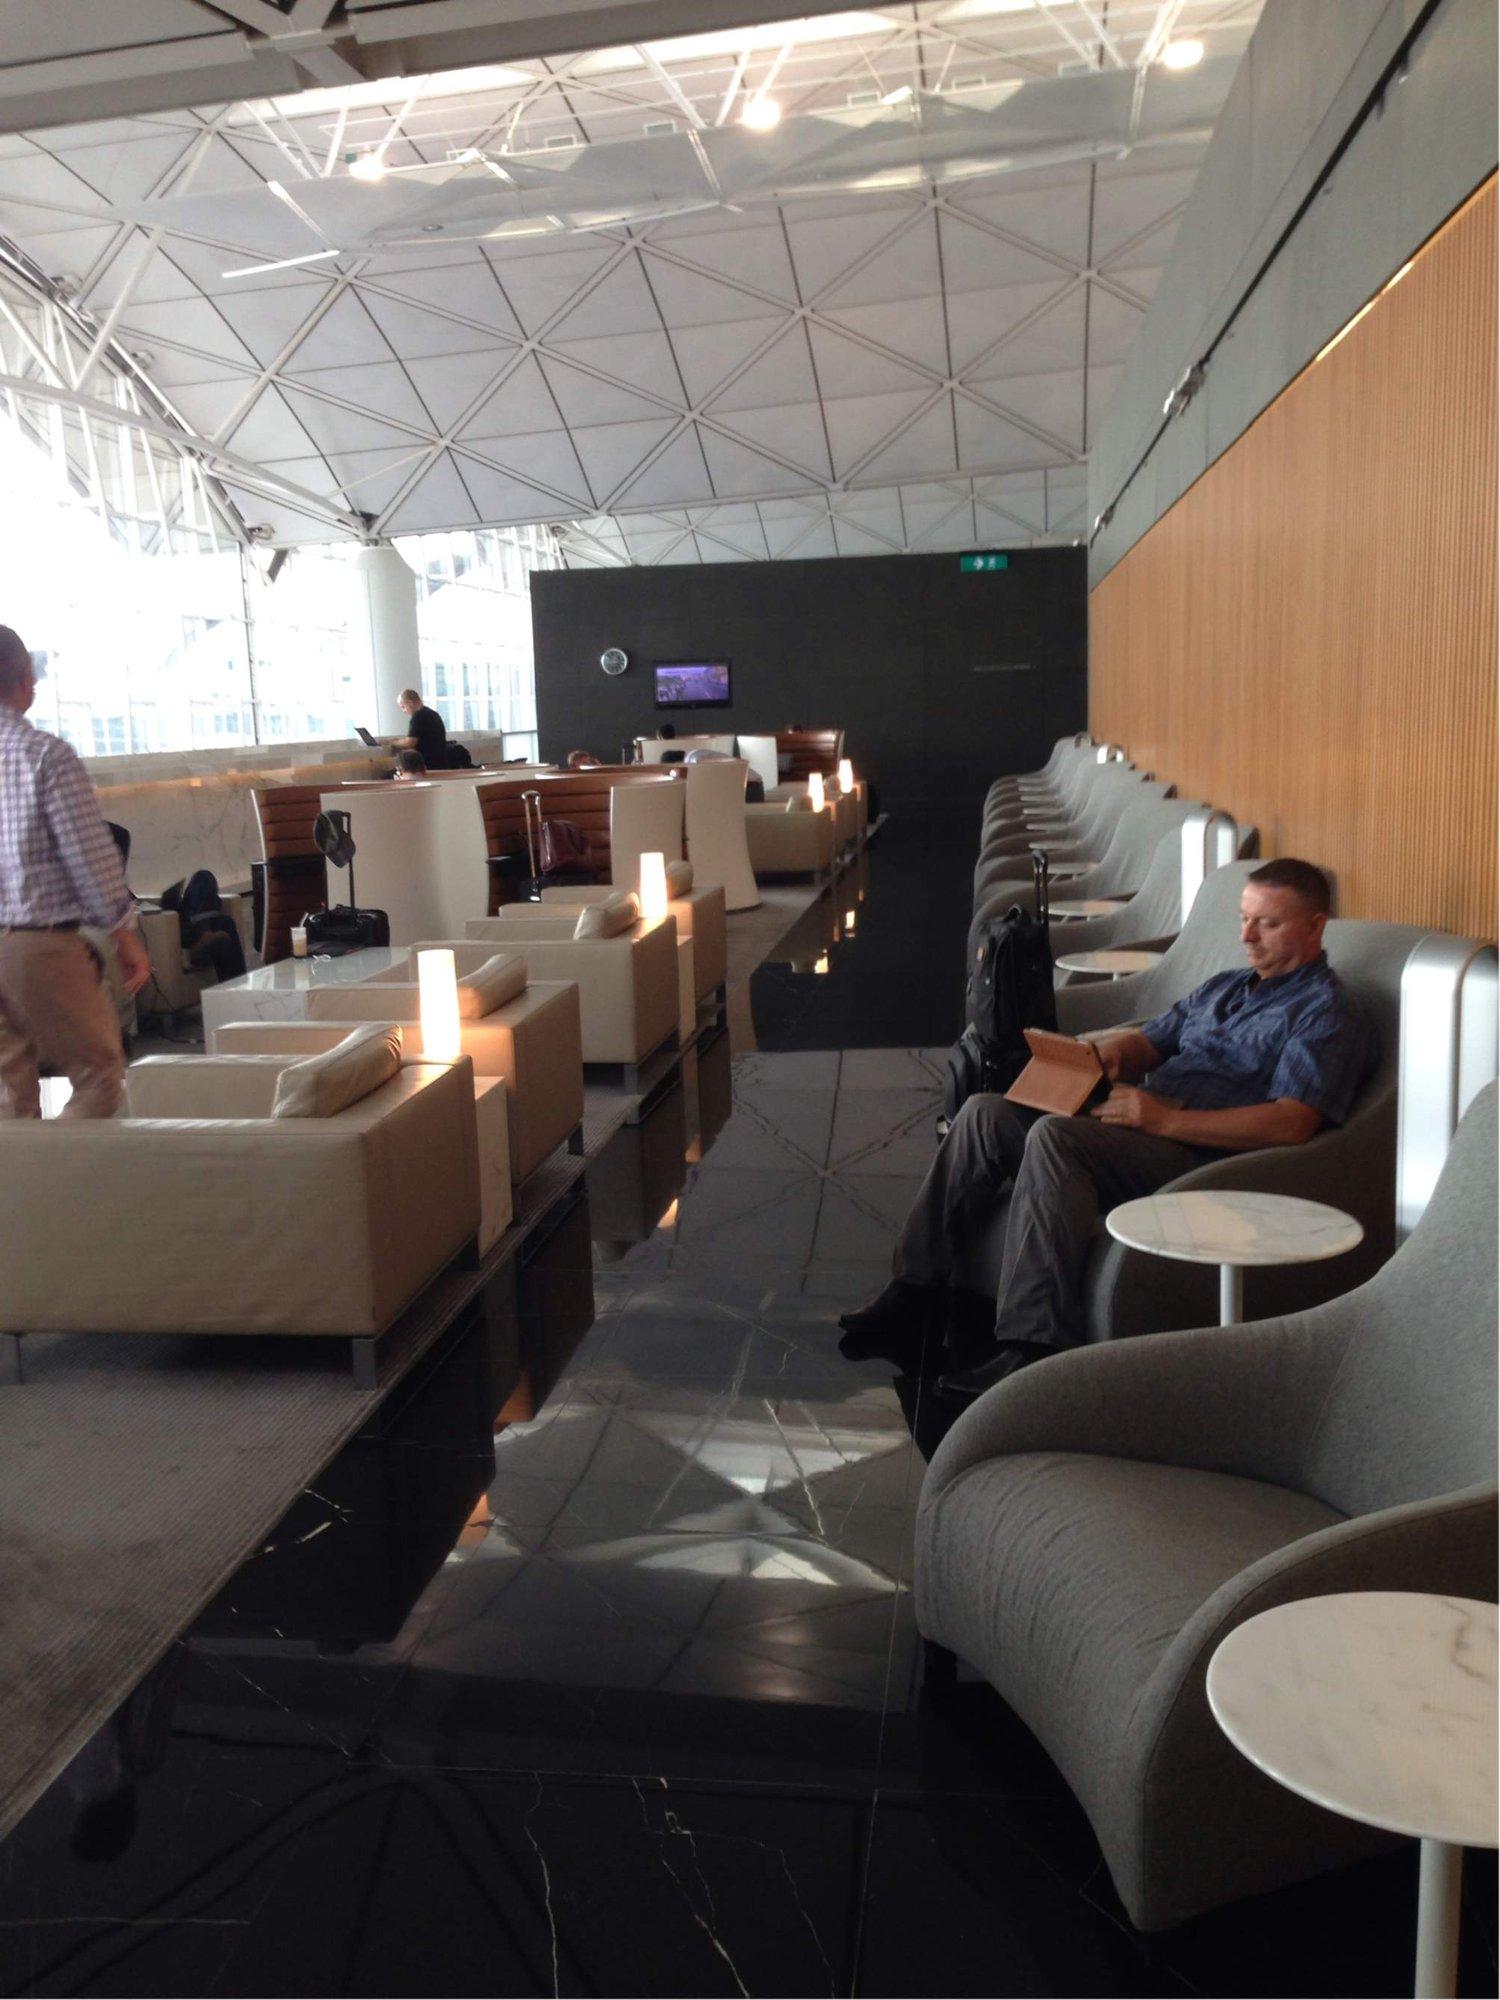 Cathay Pacific The Wing First Class Lounge image 13 of 89